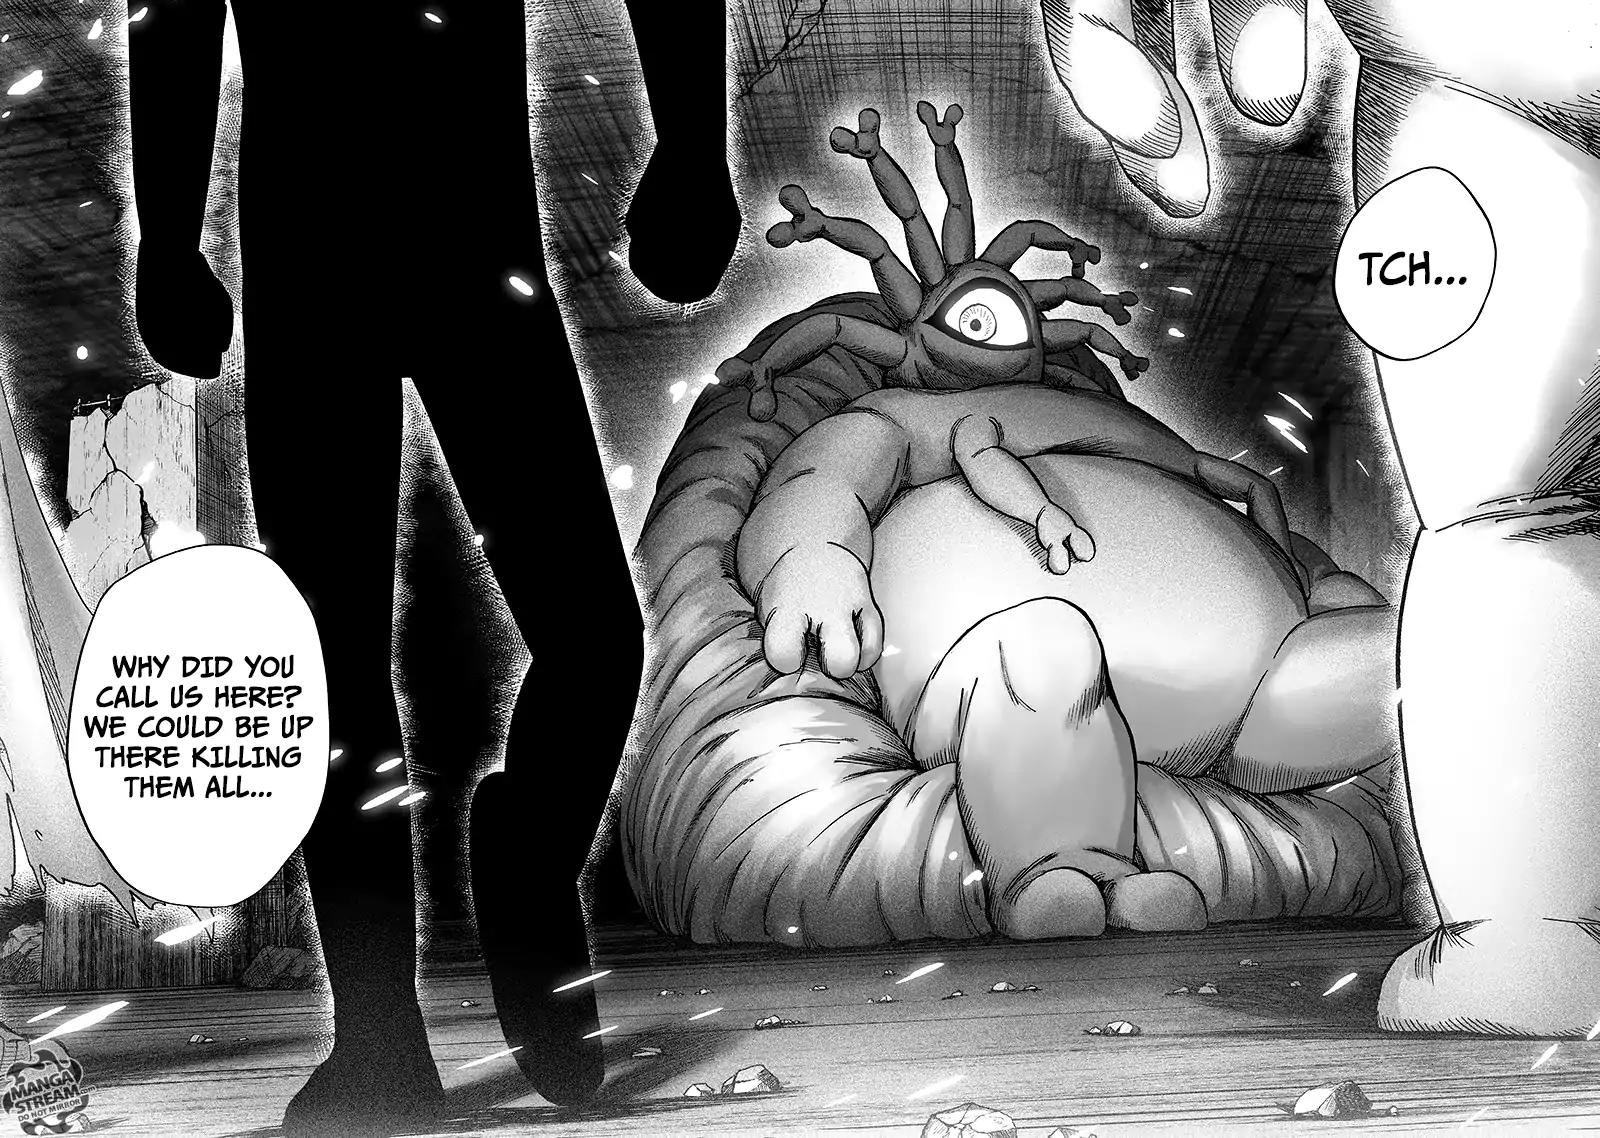 One Punch Man, Chapter 94 I See image 142